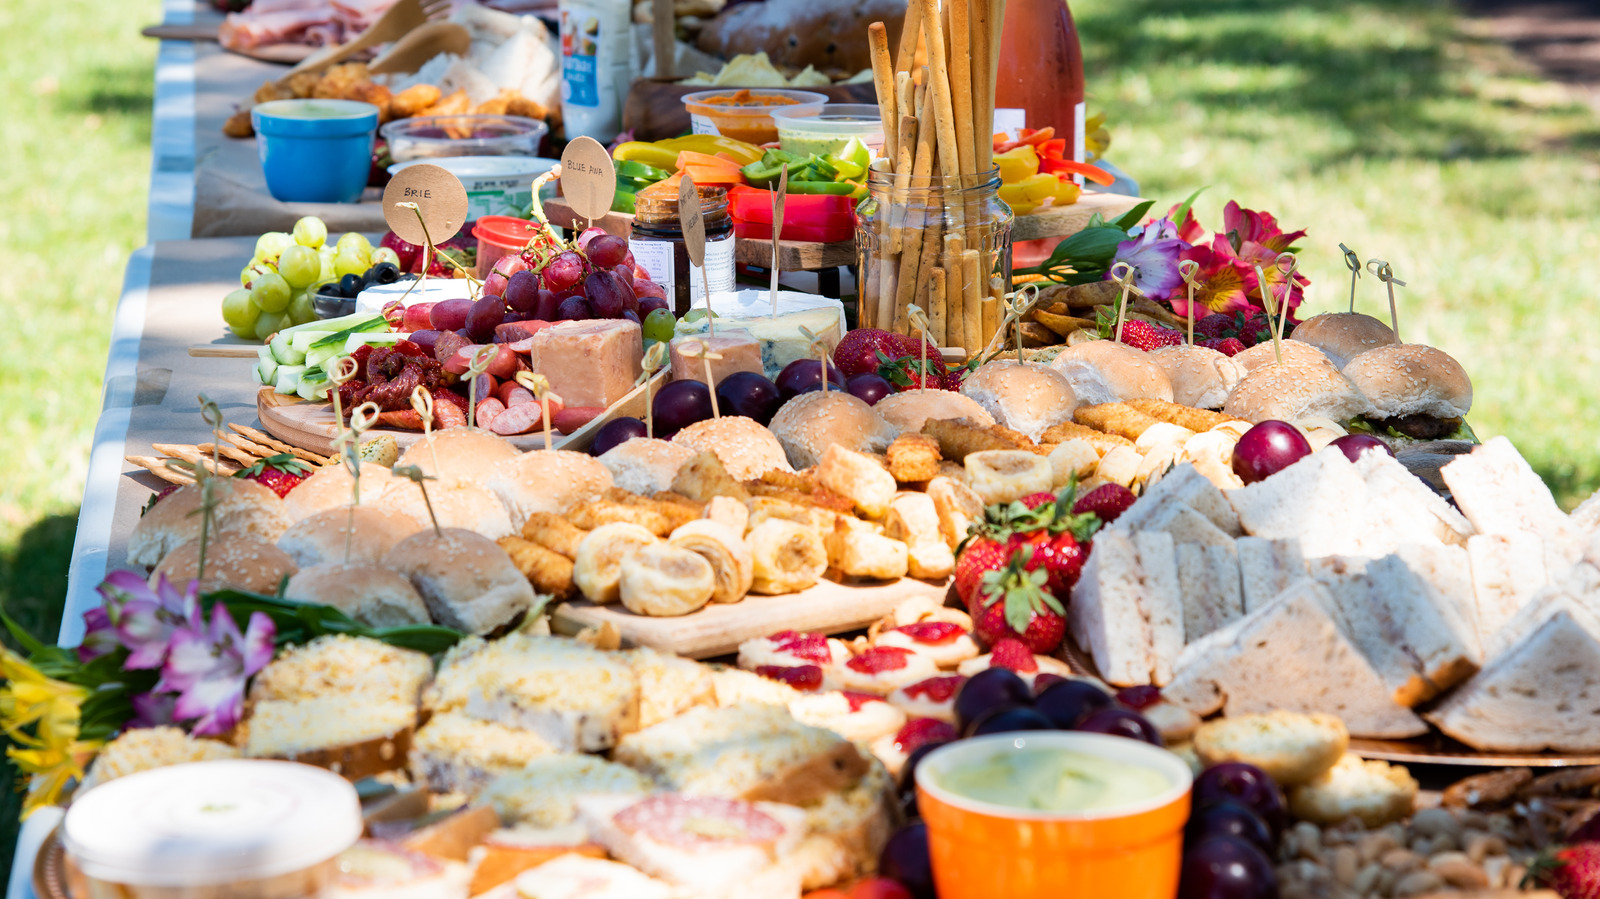 https://www.mashed.com/img/gallery/food-boards-and-grazing-tables-to-inspire-your-next-party/l-intro-1669002894.jpg